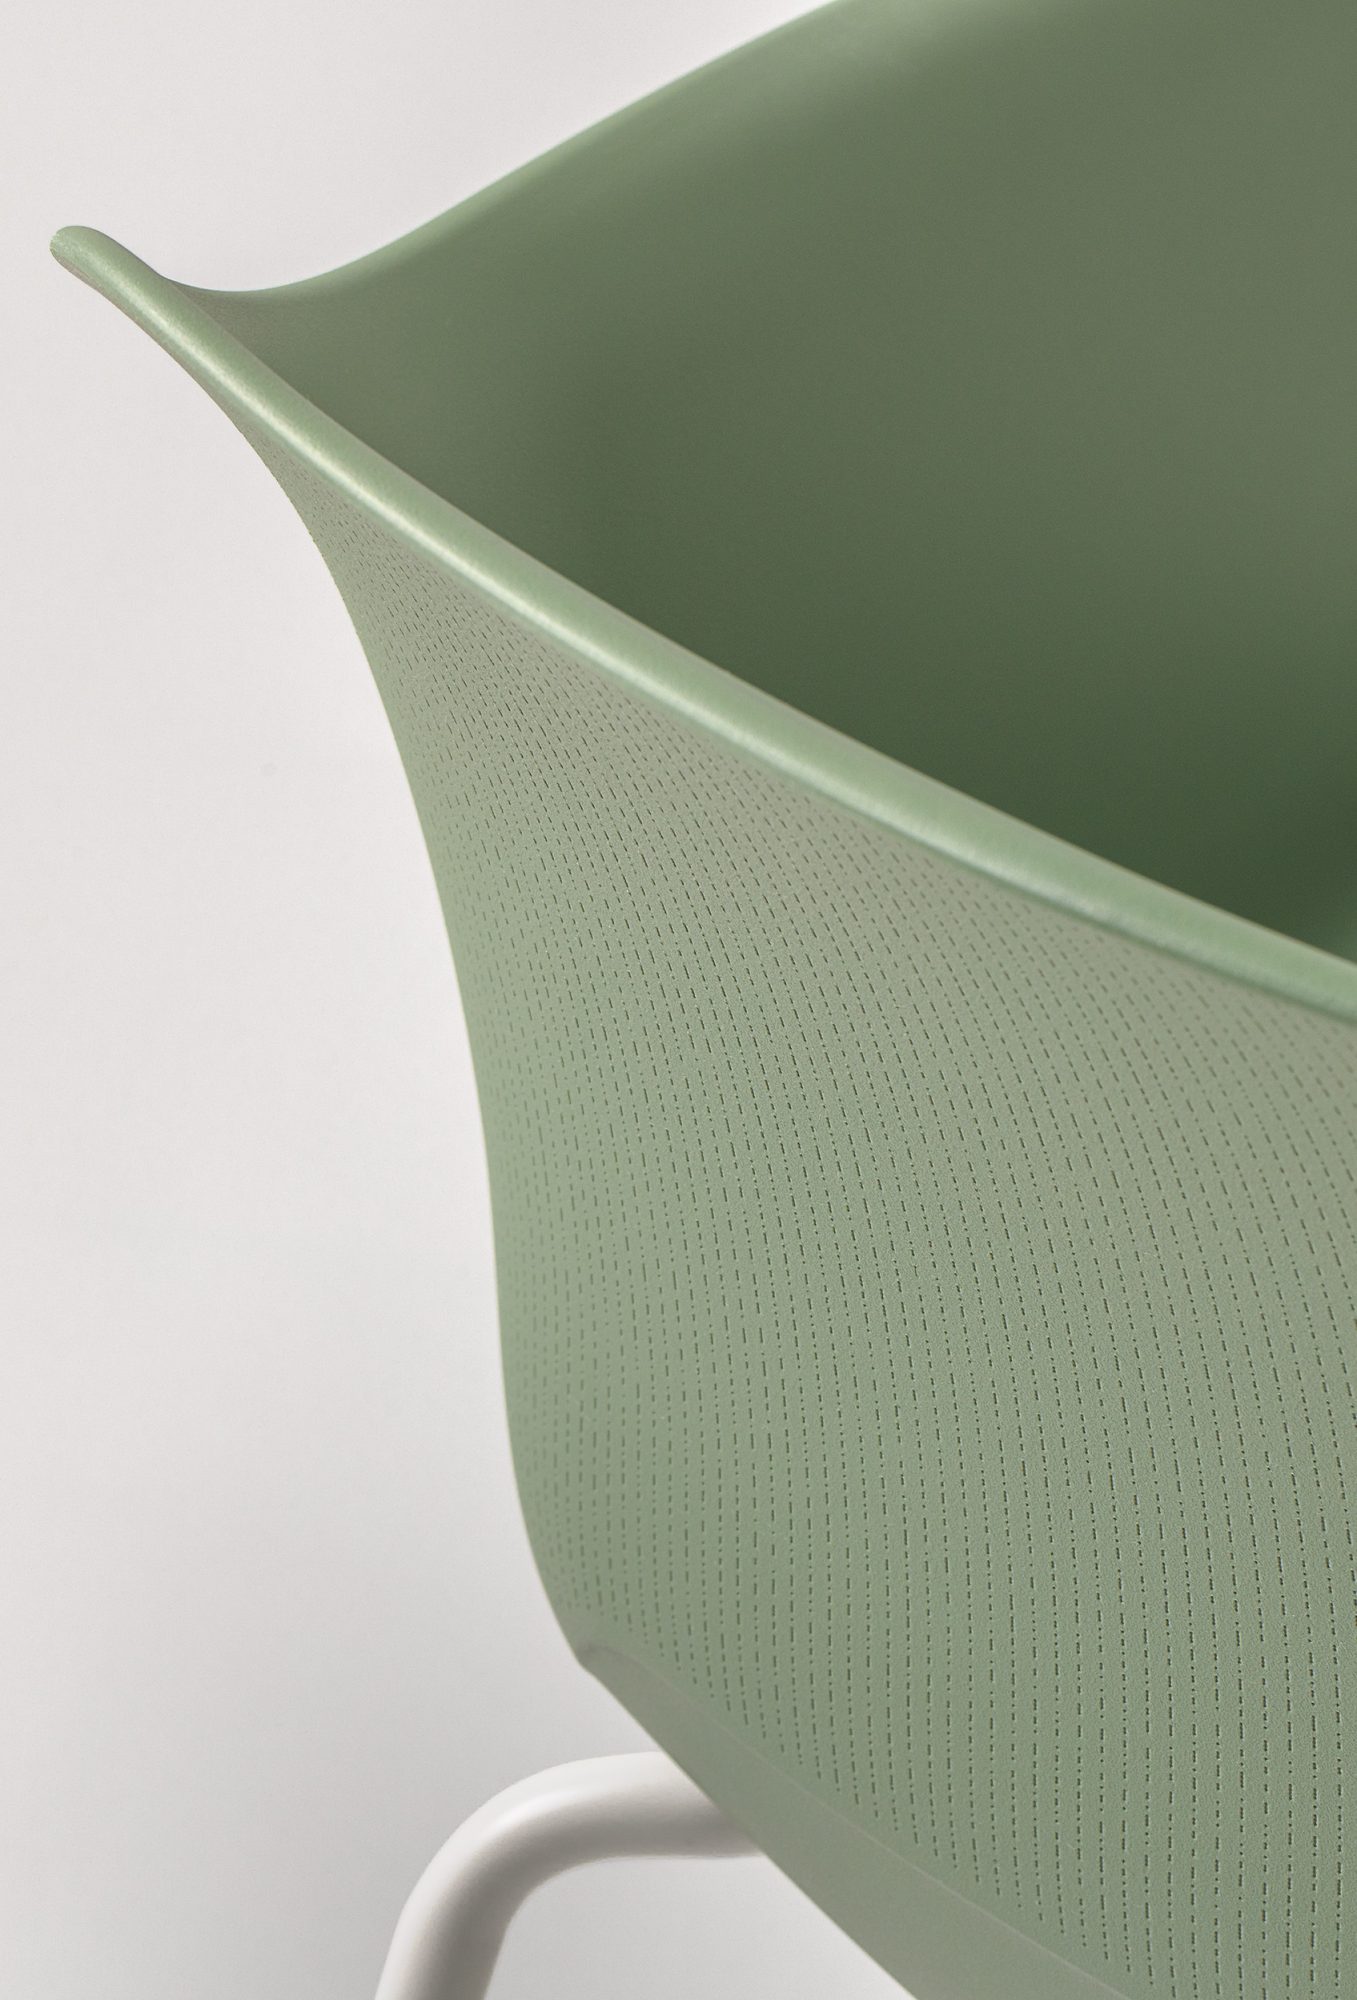 The image shows a detailed close-up of the back texture of the Noom 60 chair designed by Alegre Design for Actiu. The chair features a smooth, green surface with a subtle, fine-textured pattern. The white metal legs are partially visible, emphasizing the chair's minimalist and modern design.